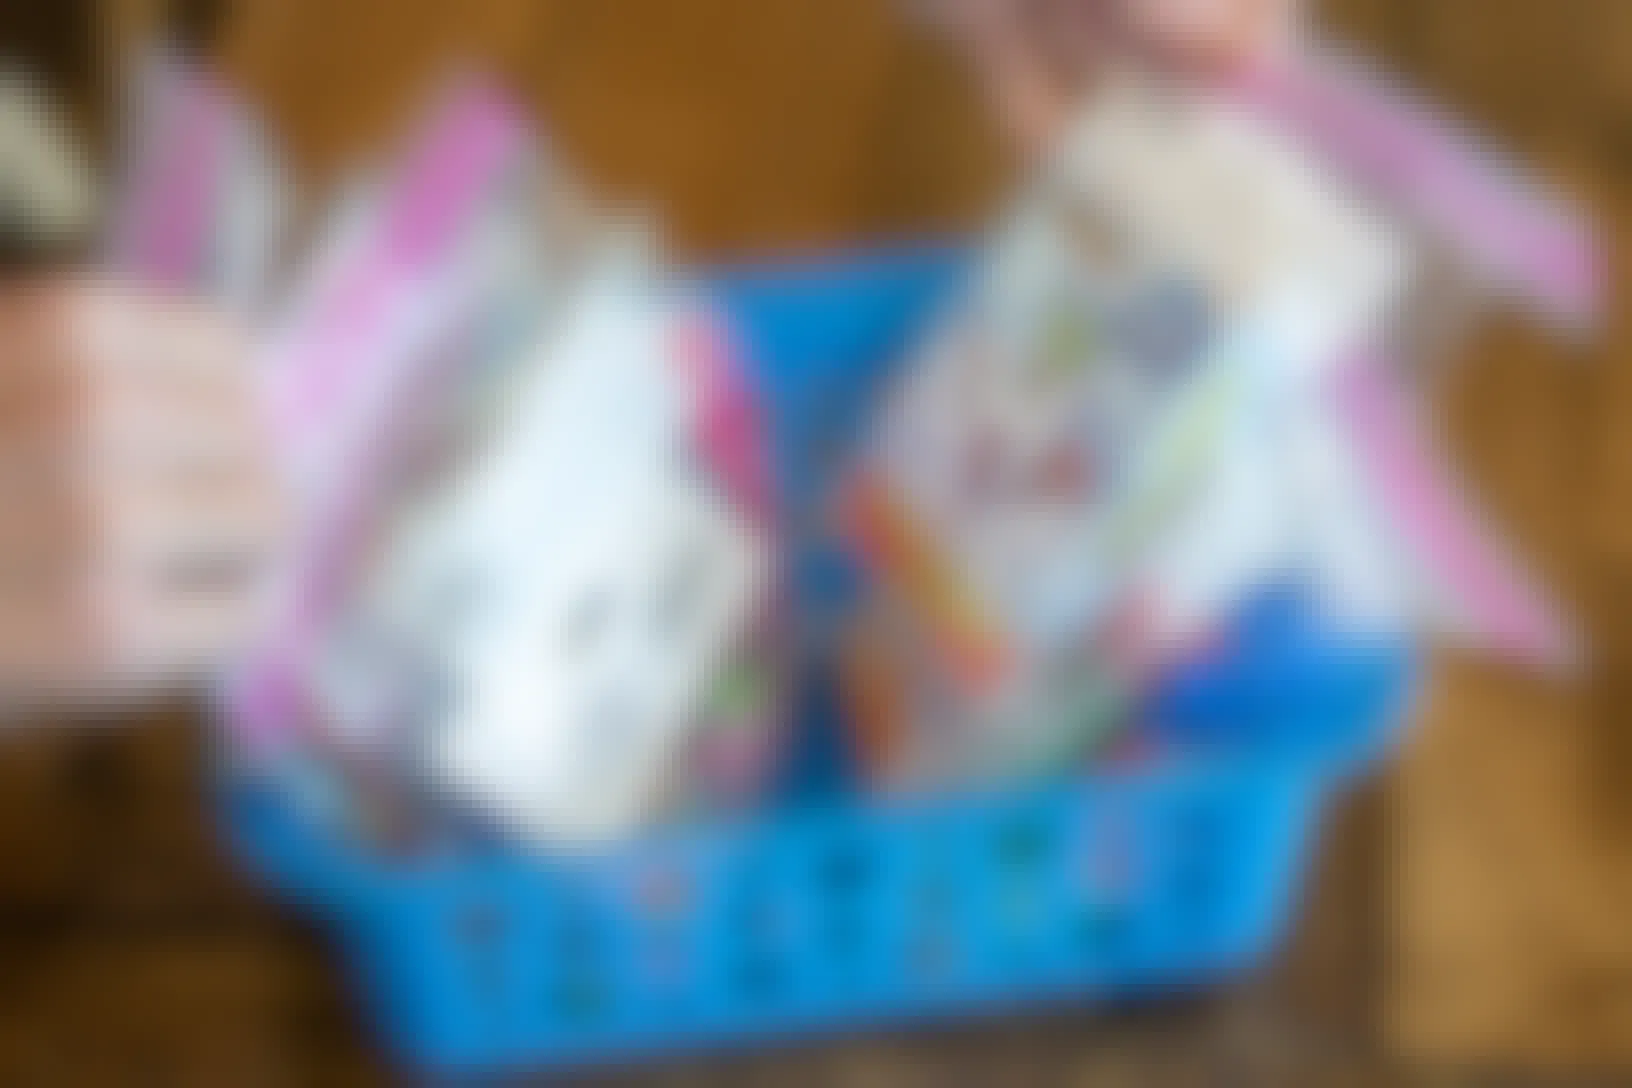 A person's hands going through several ziploc bags of toys sitting in a basket.